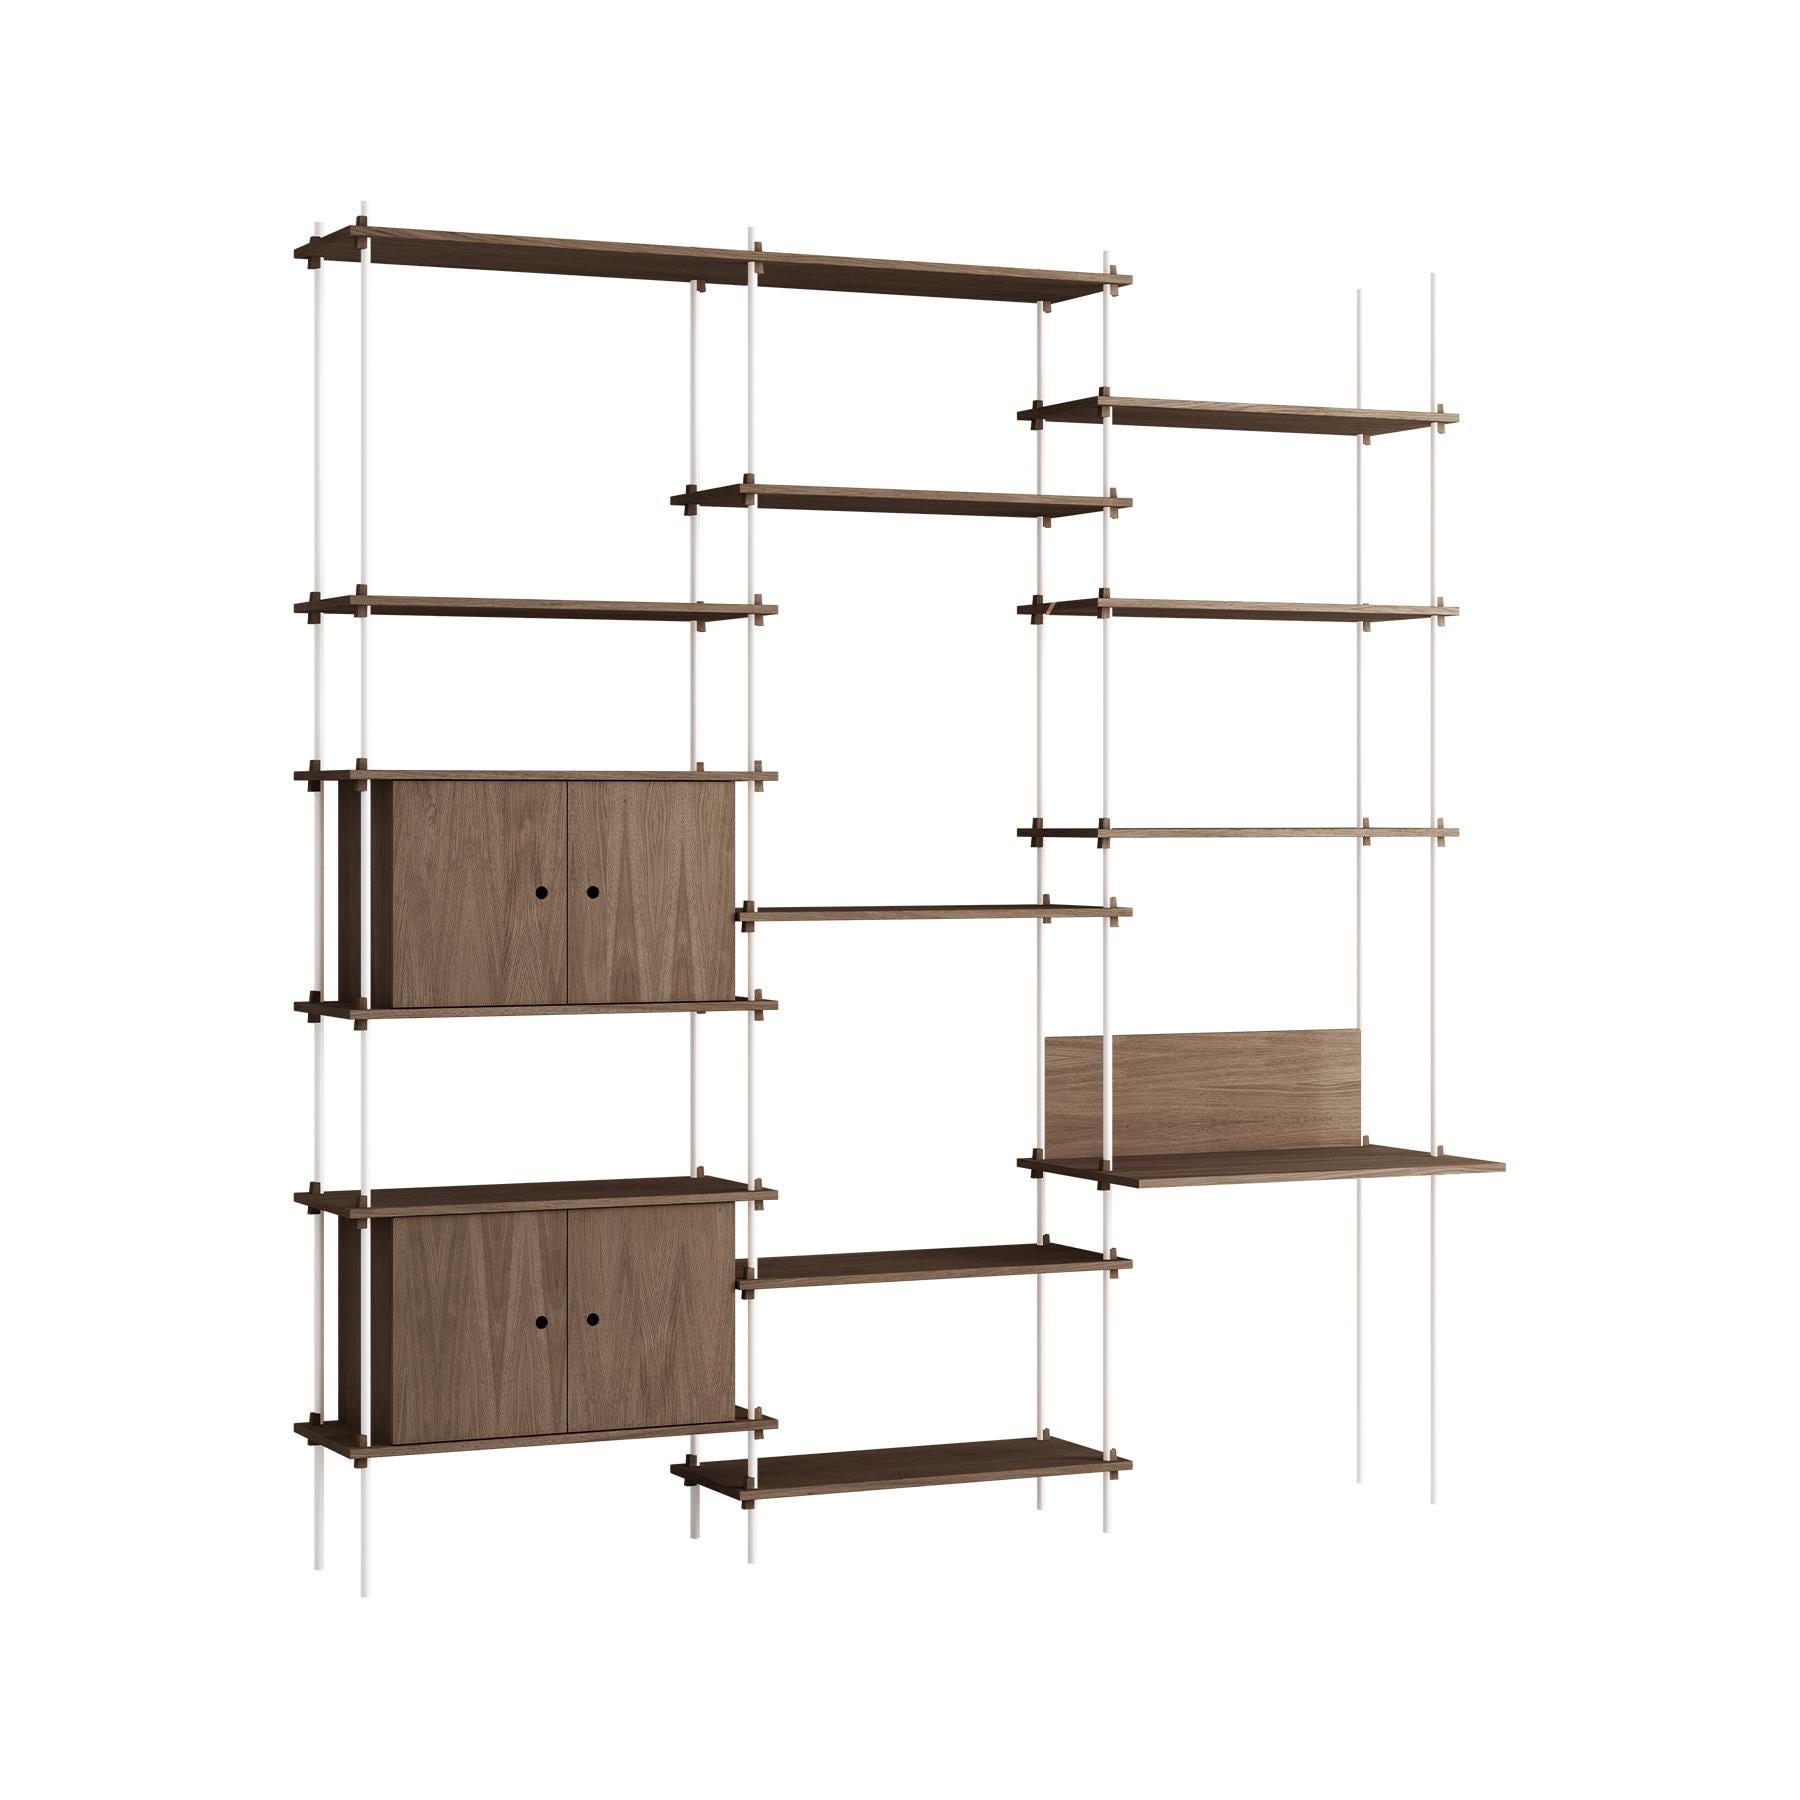 Moebe Triple Shelving System 2 Cabinets And Desk Smoked Oak White Dark Wood Designer Furniture From Holloways Of Ludlow